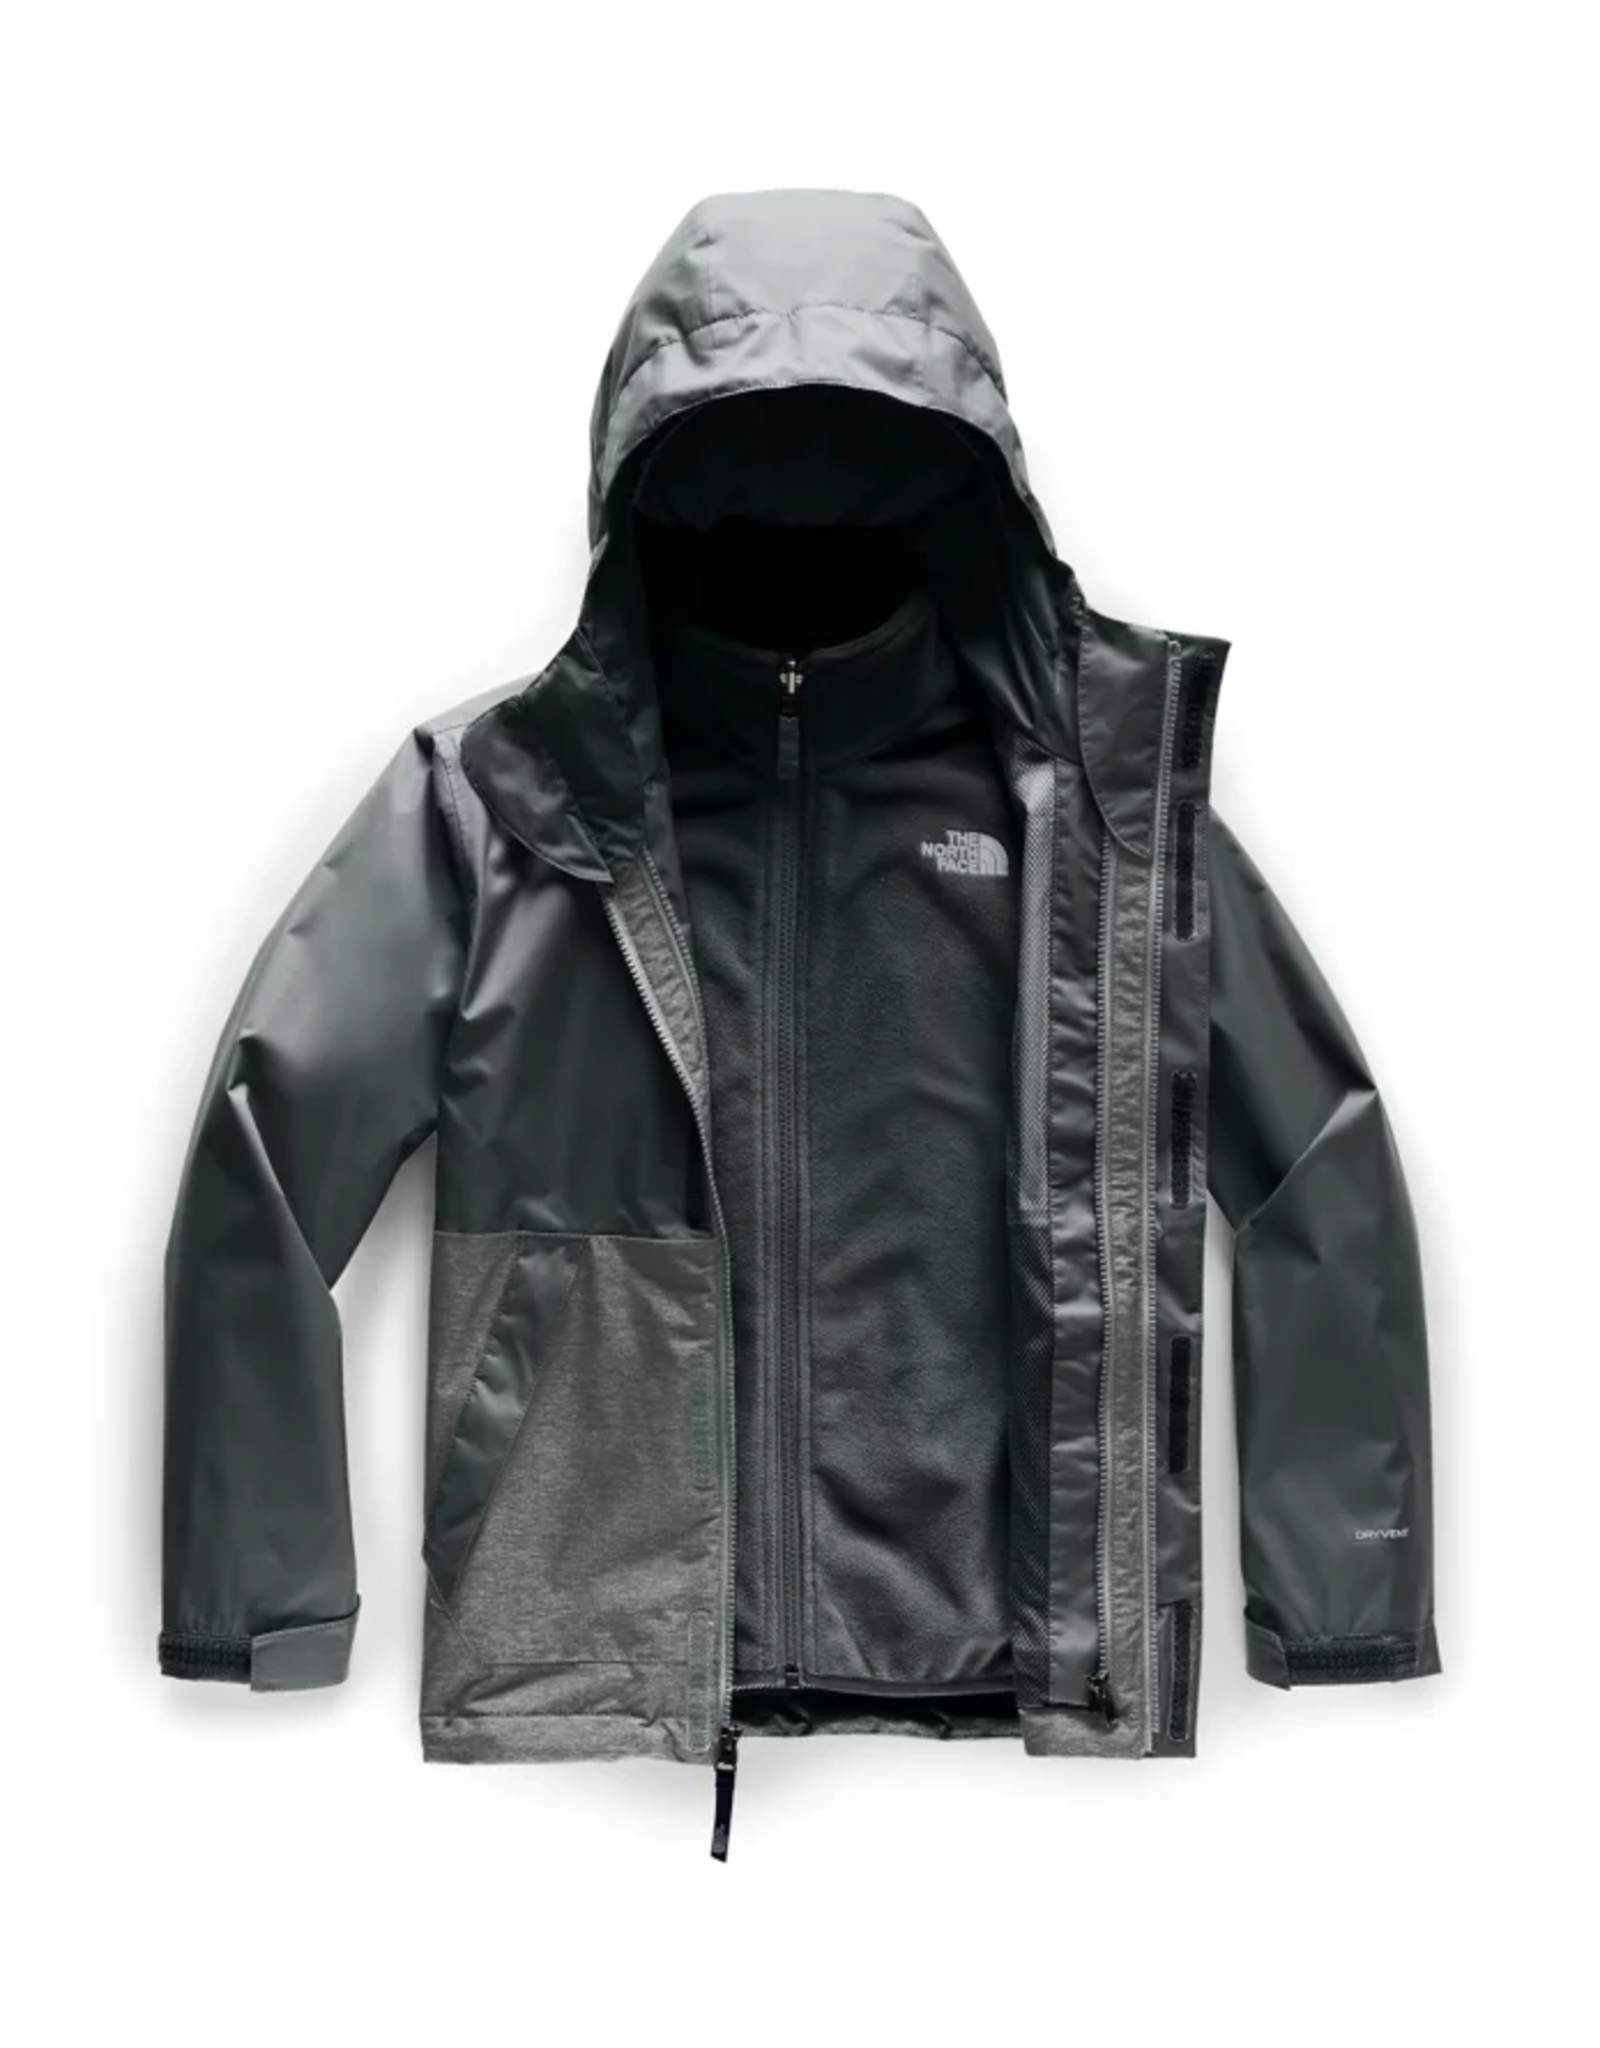 the north face vortex triclimate jacket